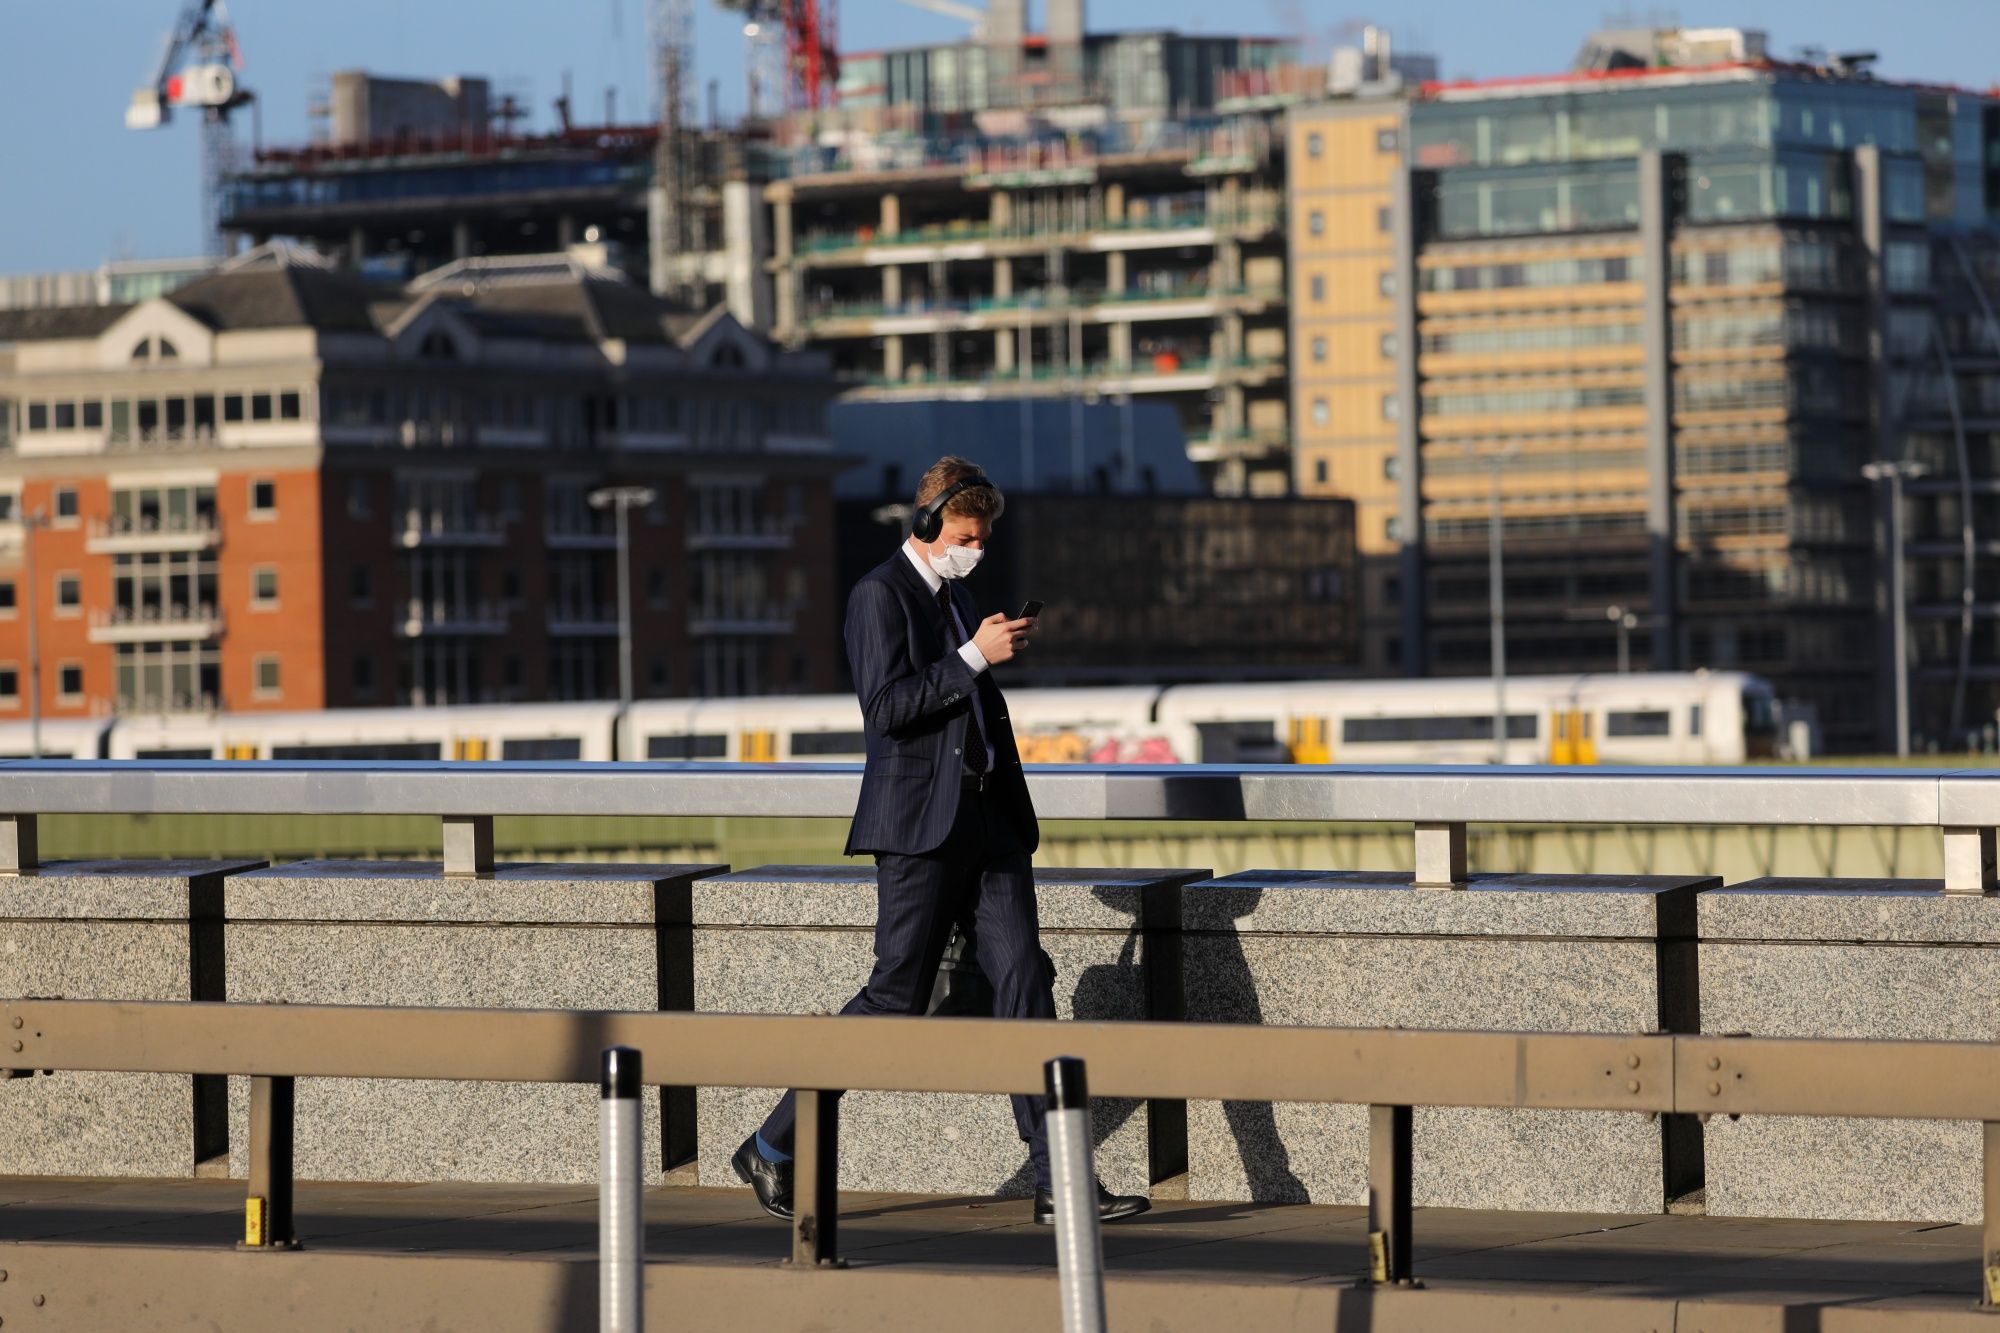 A commuter, wearing a protective face mask, looks at his mobile phone as he crosses London Bridge in London, U.K., on Thursday, Oct. 15, 2020. London is on course for an imminent tightening of coronavirus restrictions, as cases continue to rise in Britain and its response fragments. Photographer: Simon Dawson/Bloomberg